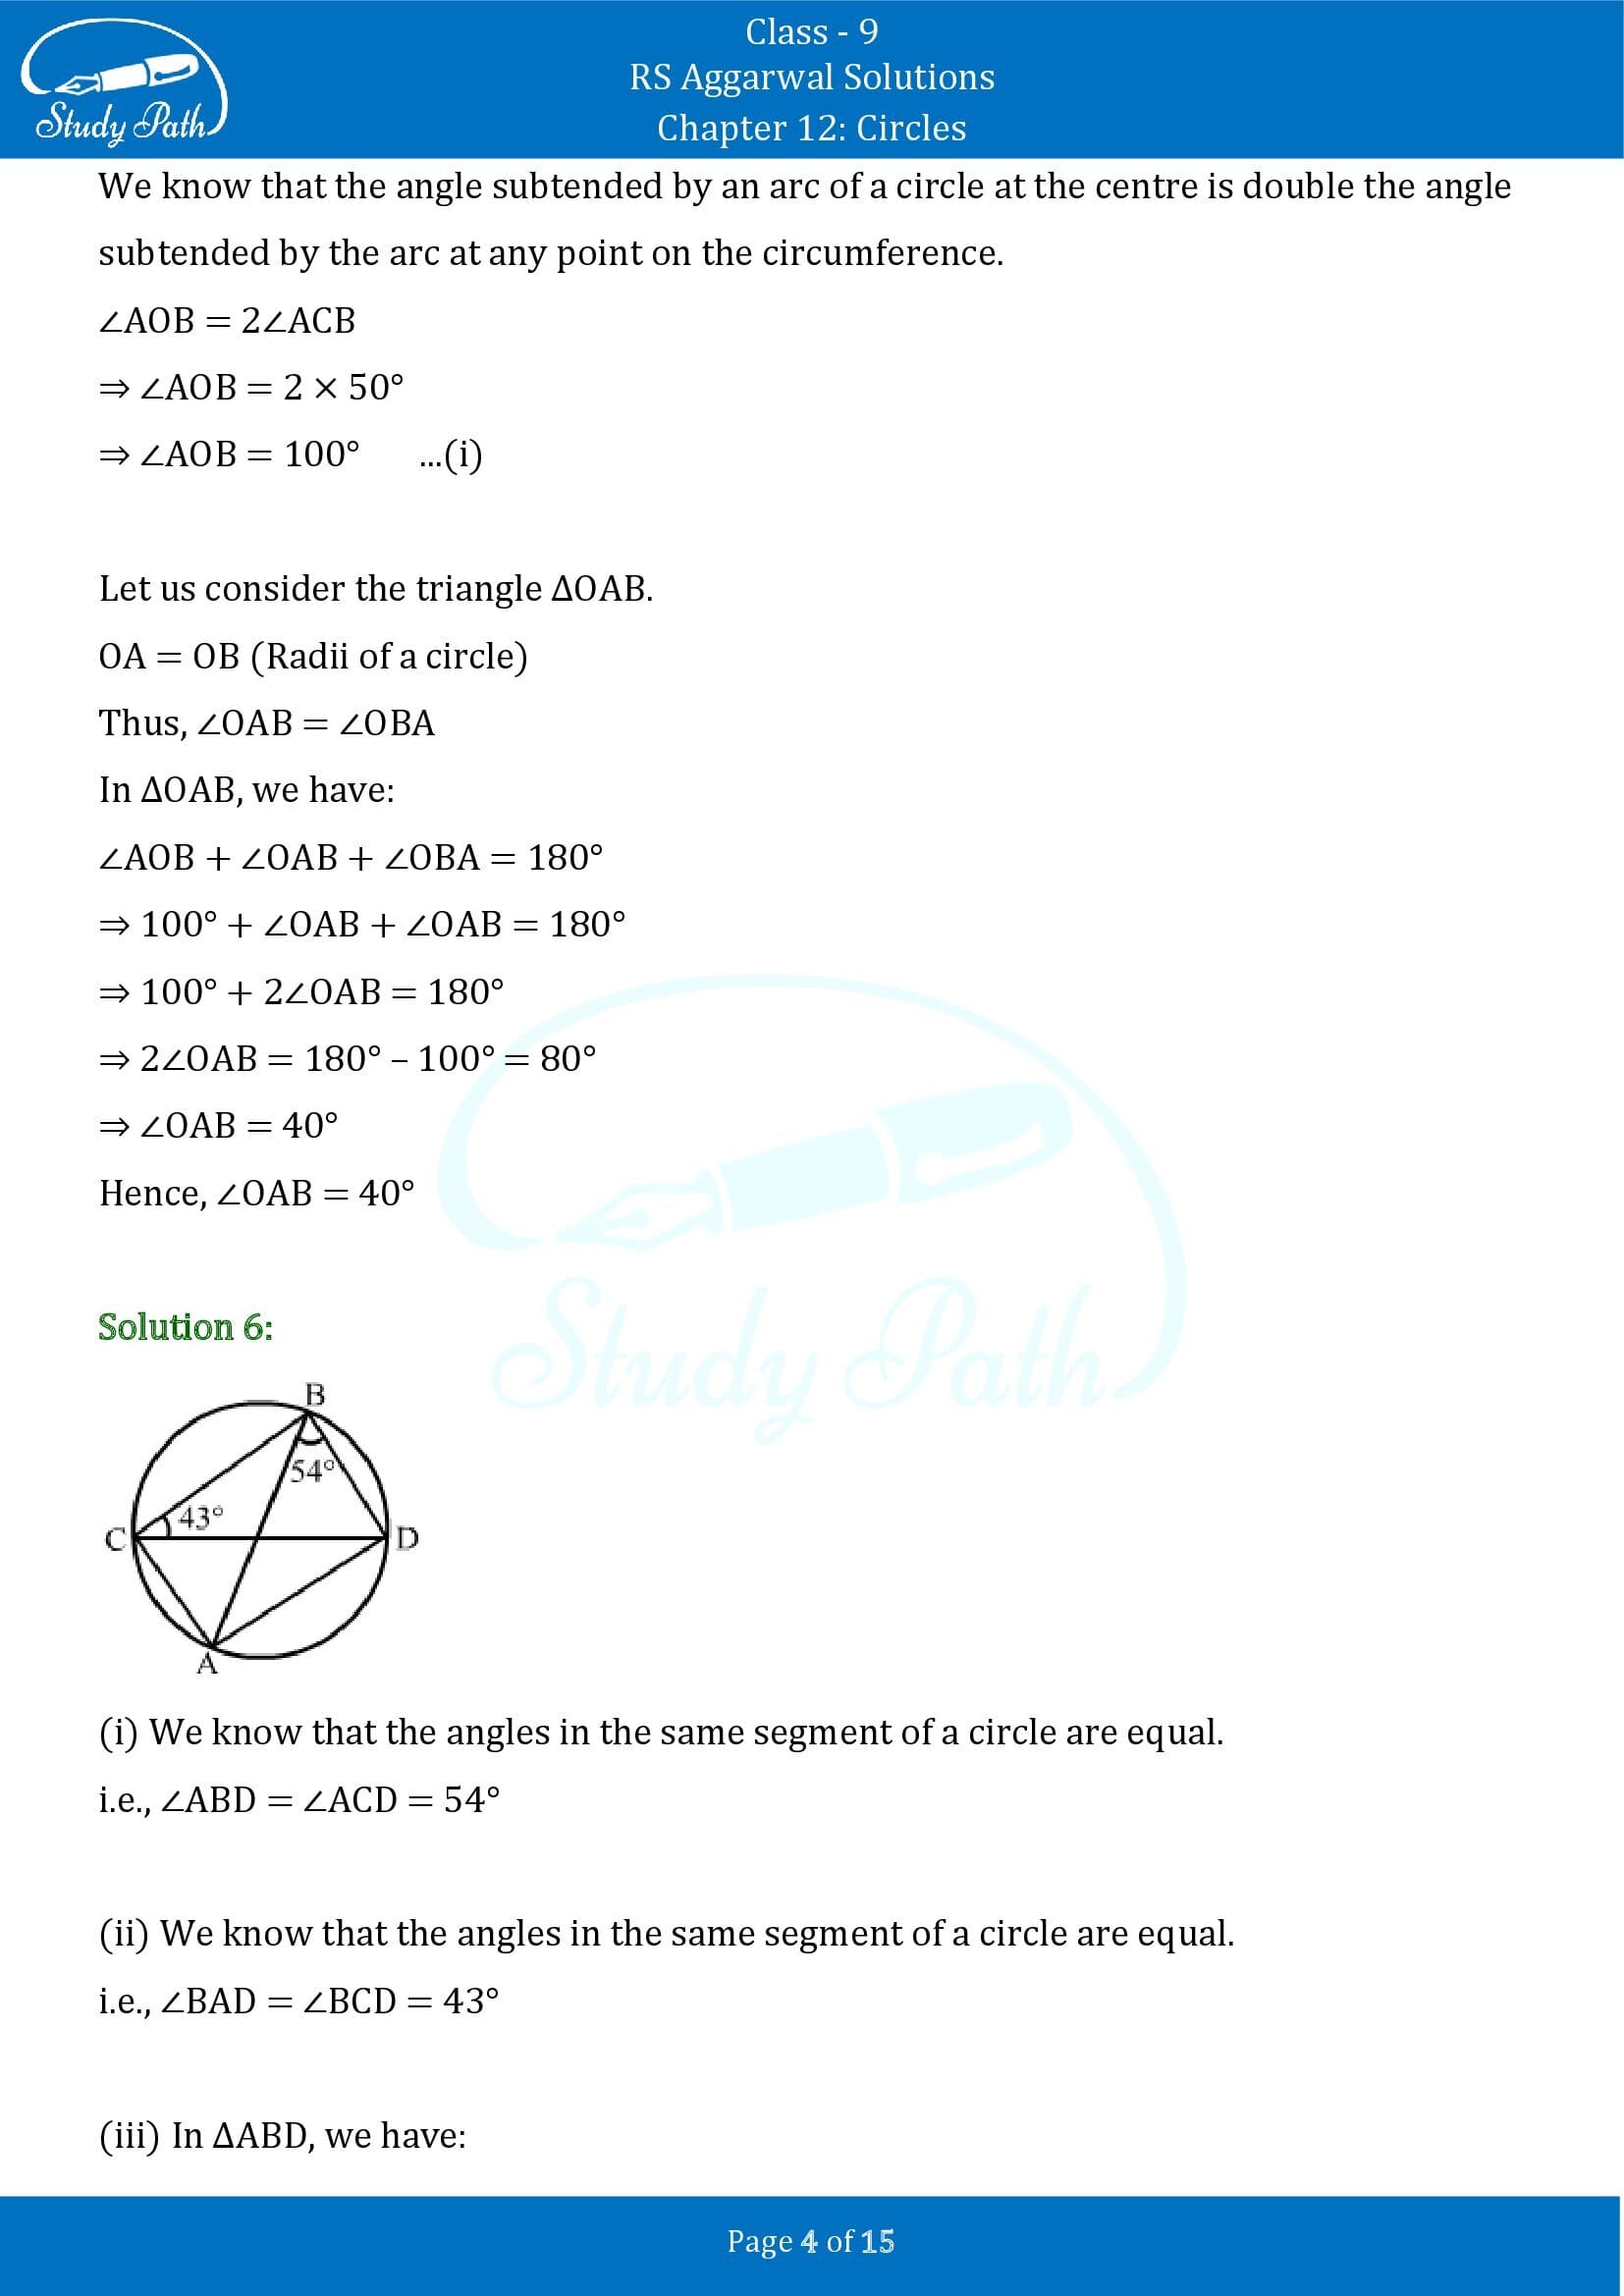 RS Aggarwal Solutions Class 9 Chapter 12 Circles Exercise 12B 00004